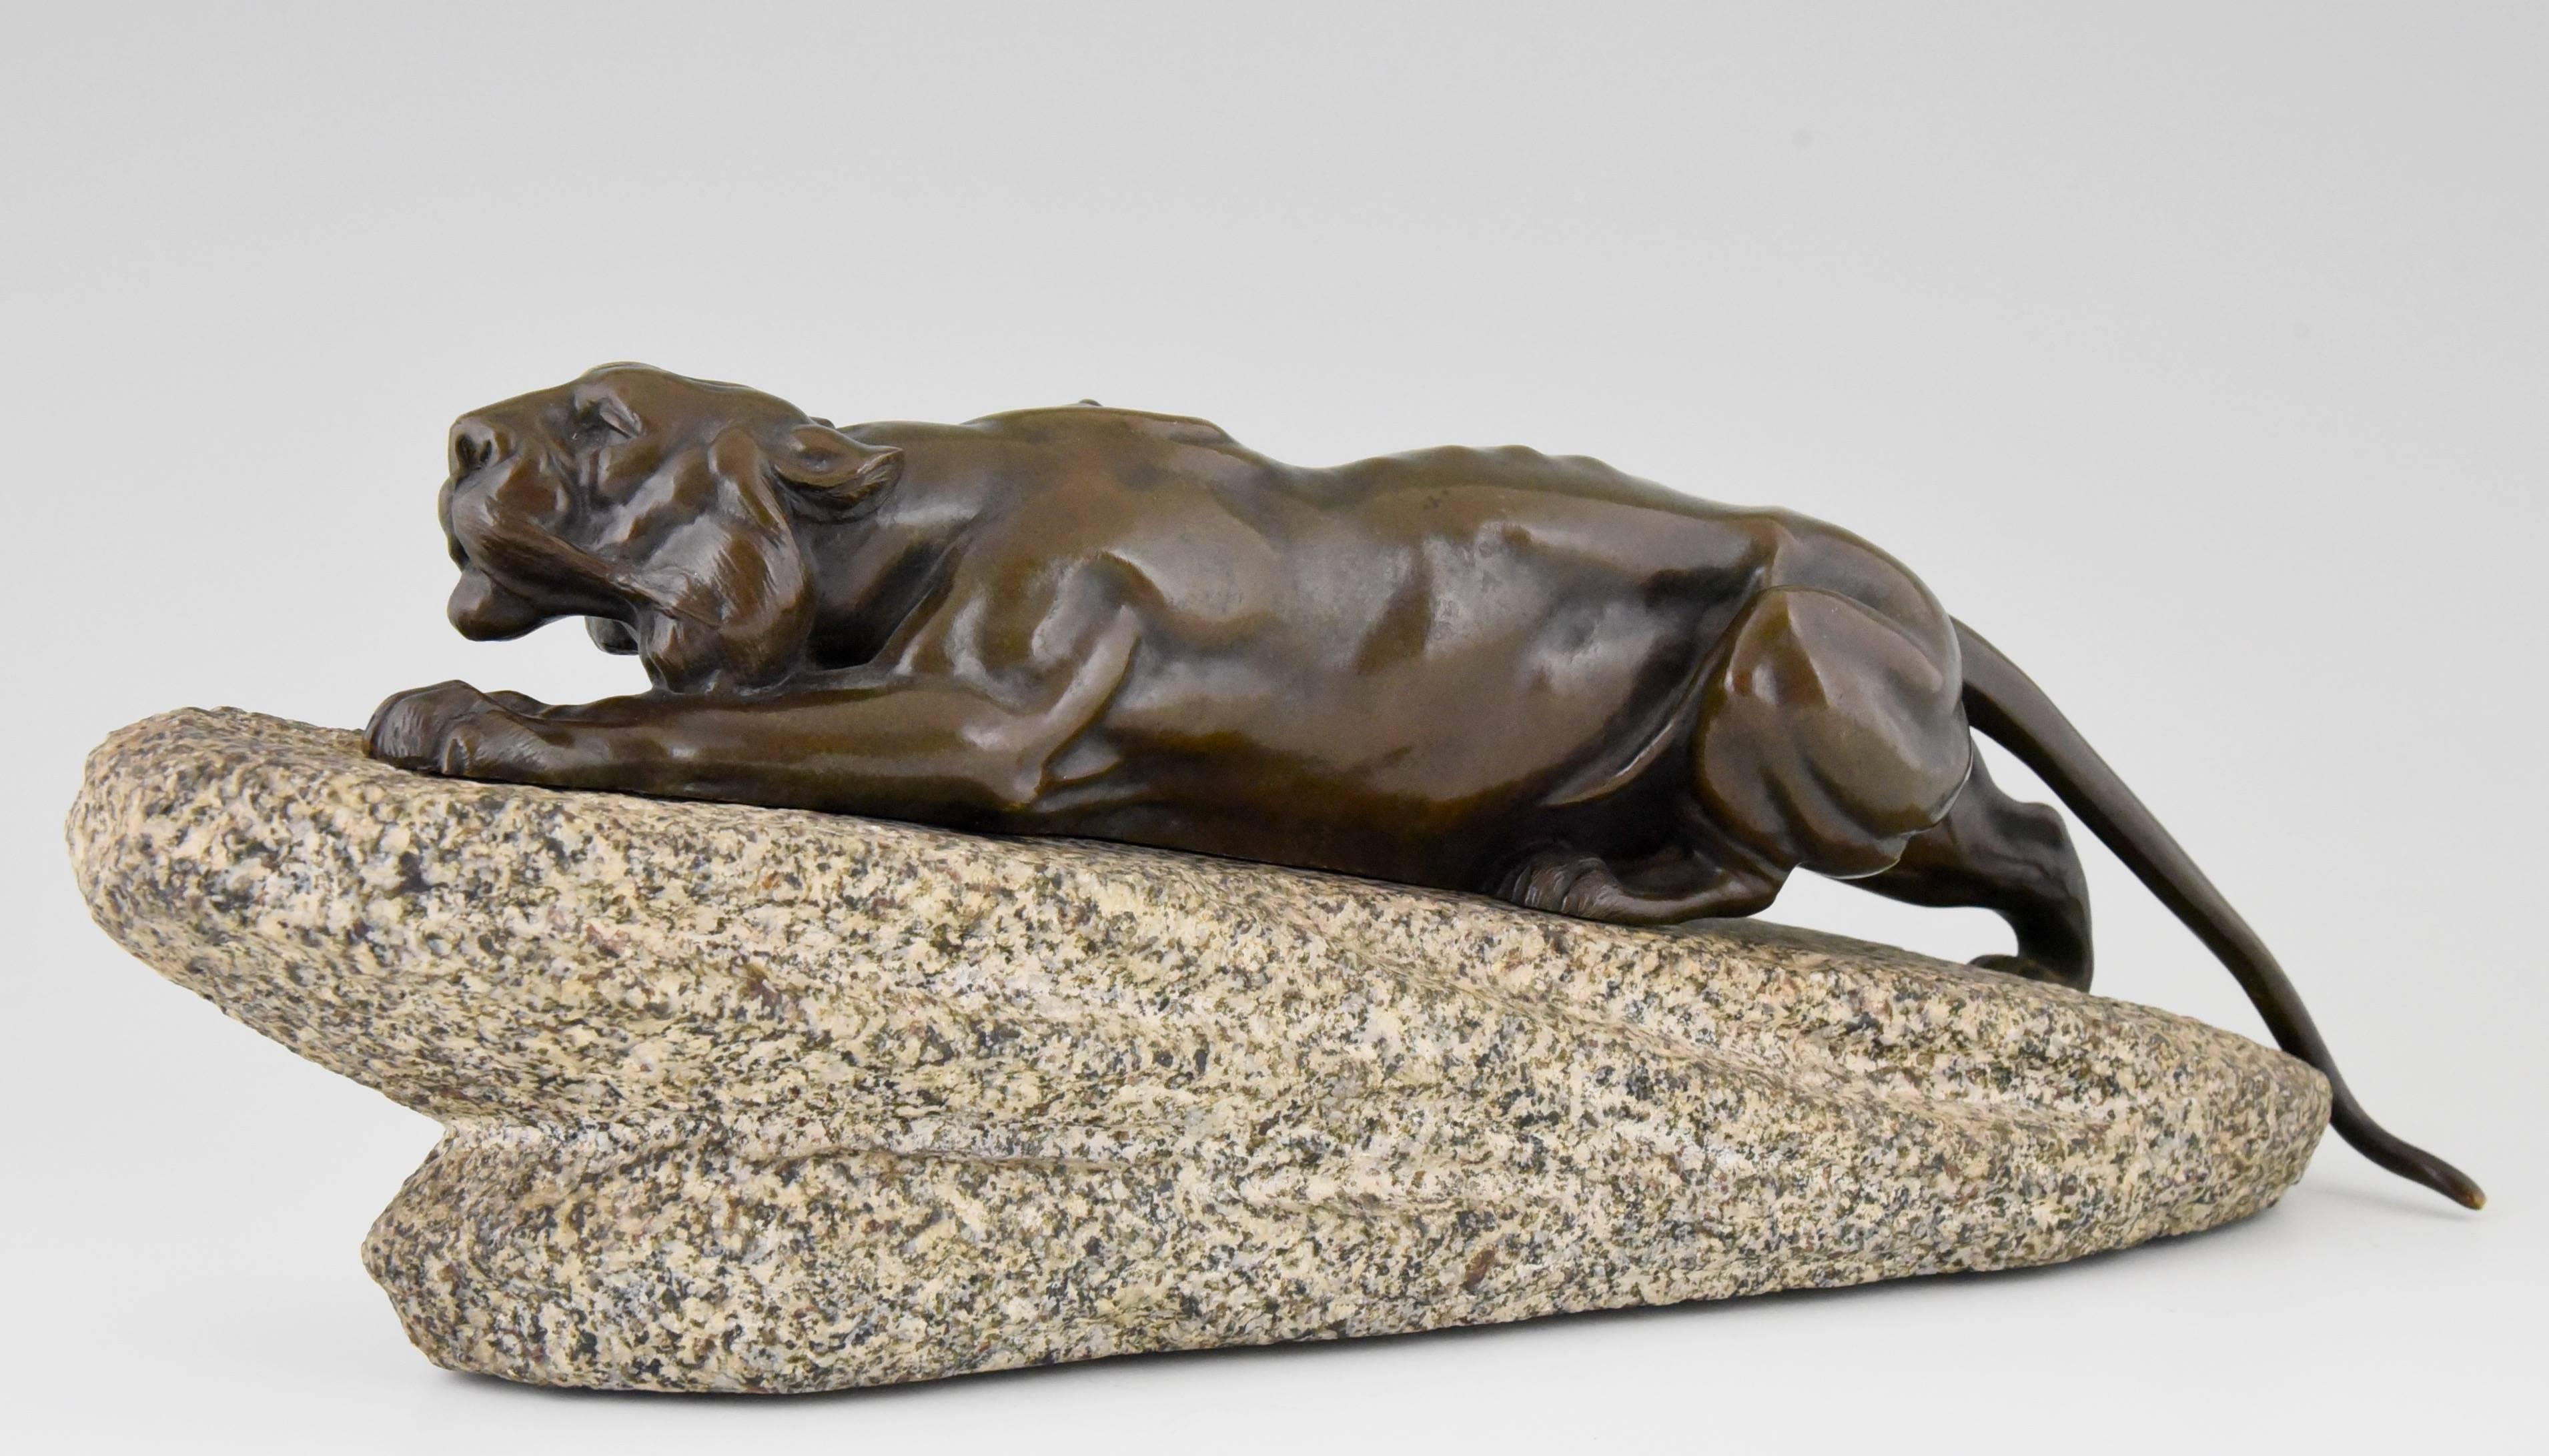 A bronze panther on a rock by  Leon Bureau. 
Style:  Romantic.
Date:  1900. 
Material: Bronze, on a stone base.
Origin:  France. 			
Size:  
H. 43 cm. x L. 15,5 cm. x W. 11 cm. 
 H. 16.9 inch x L. 6.1 inch. x W. 4.3 inch.  
Condition:  Good